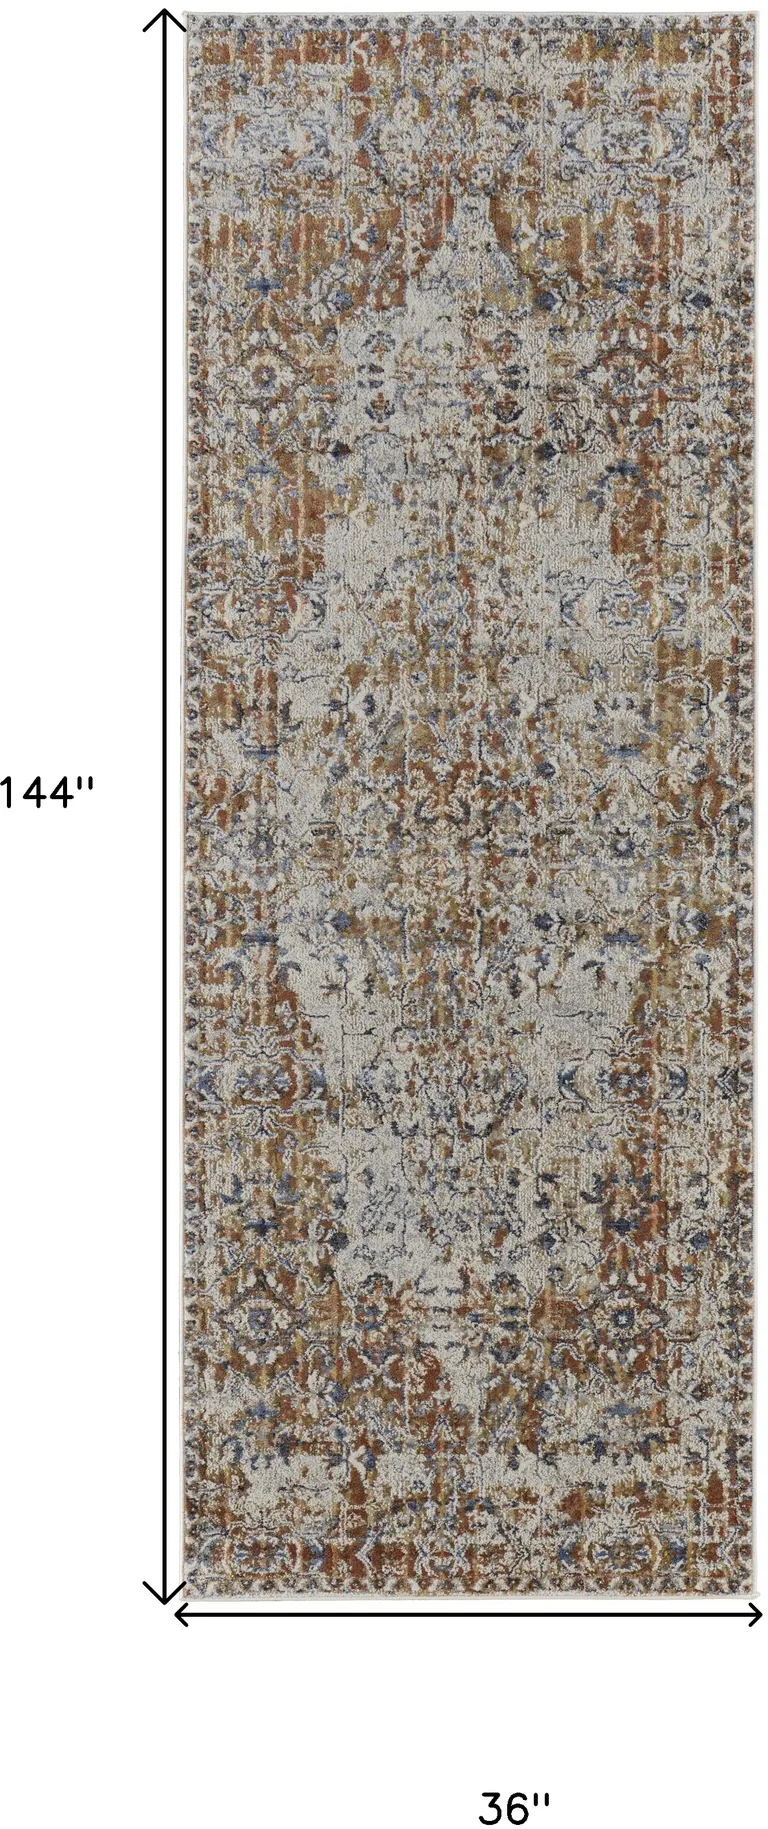 12' Tan Ivory And Orange Floral Power Loom Runner Rug With Fringe Photo 4